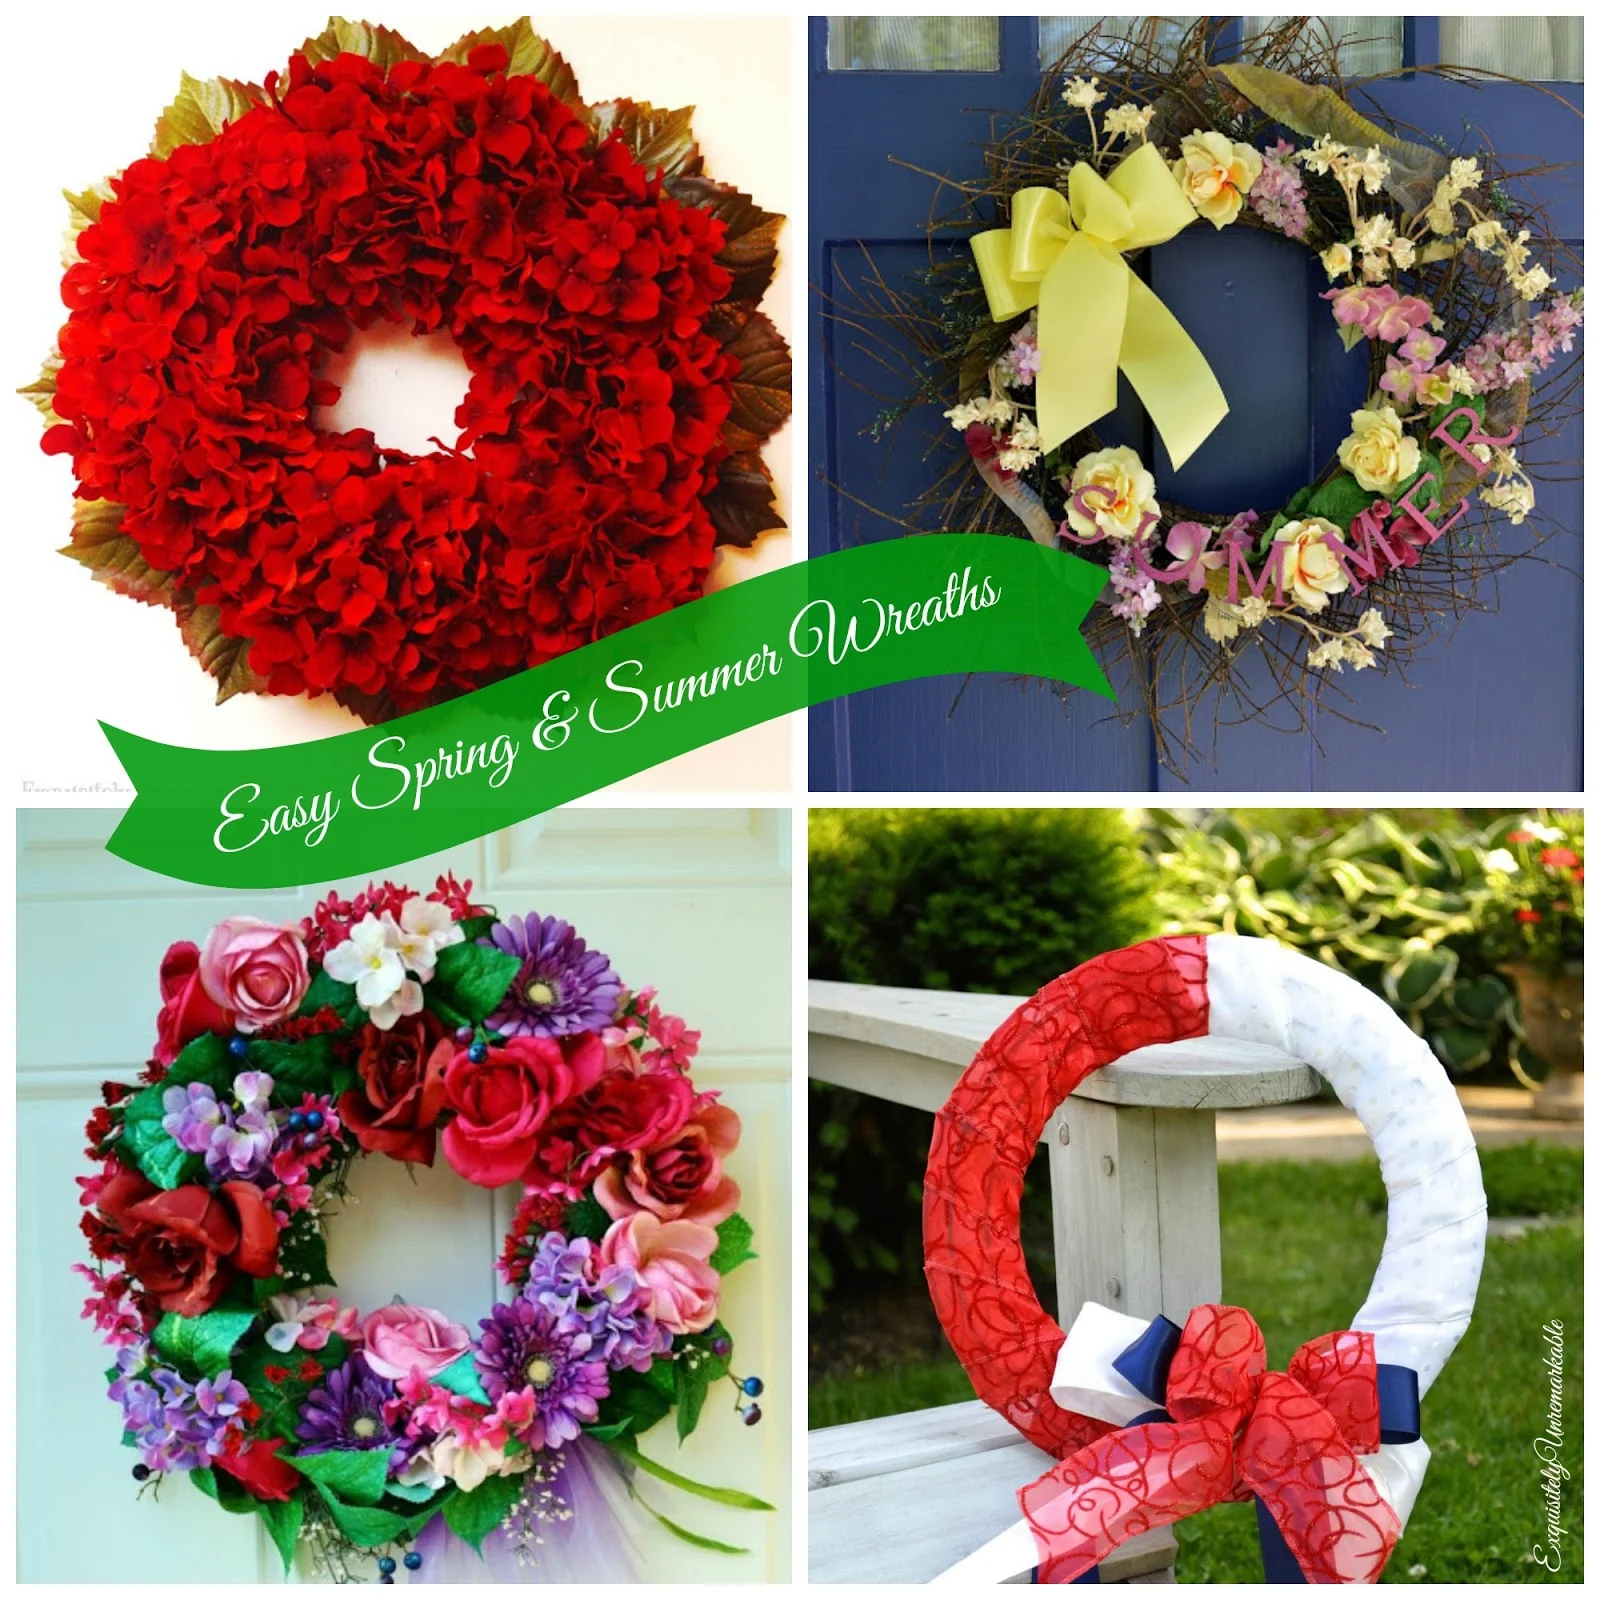 Easy Spring and Summer Wreaths 